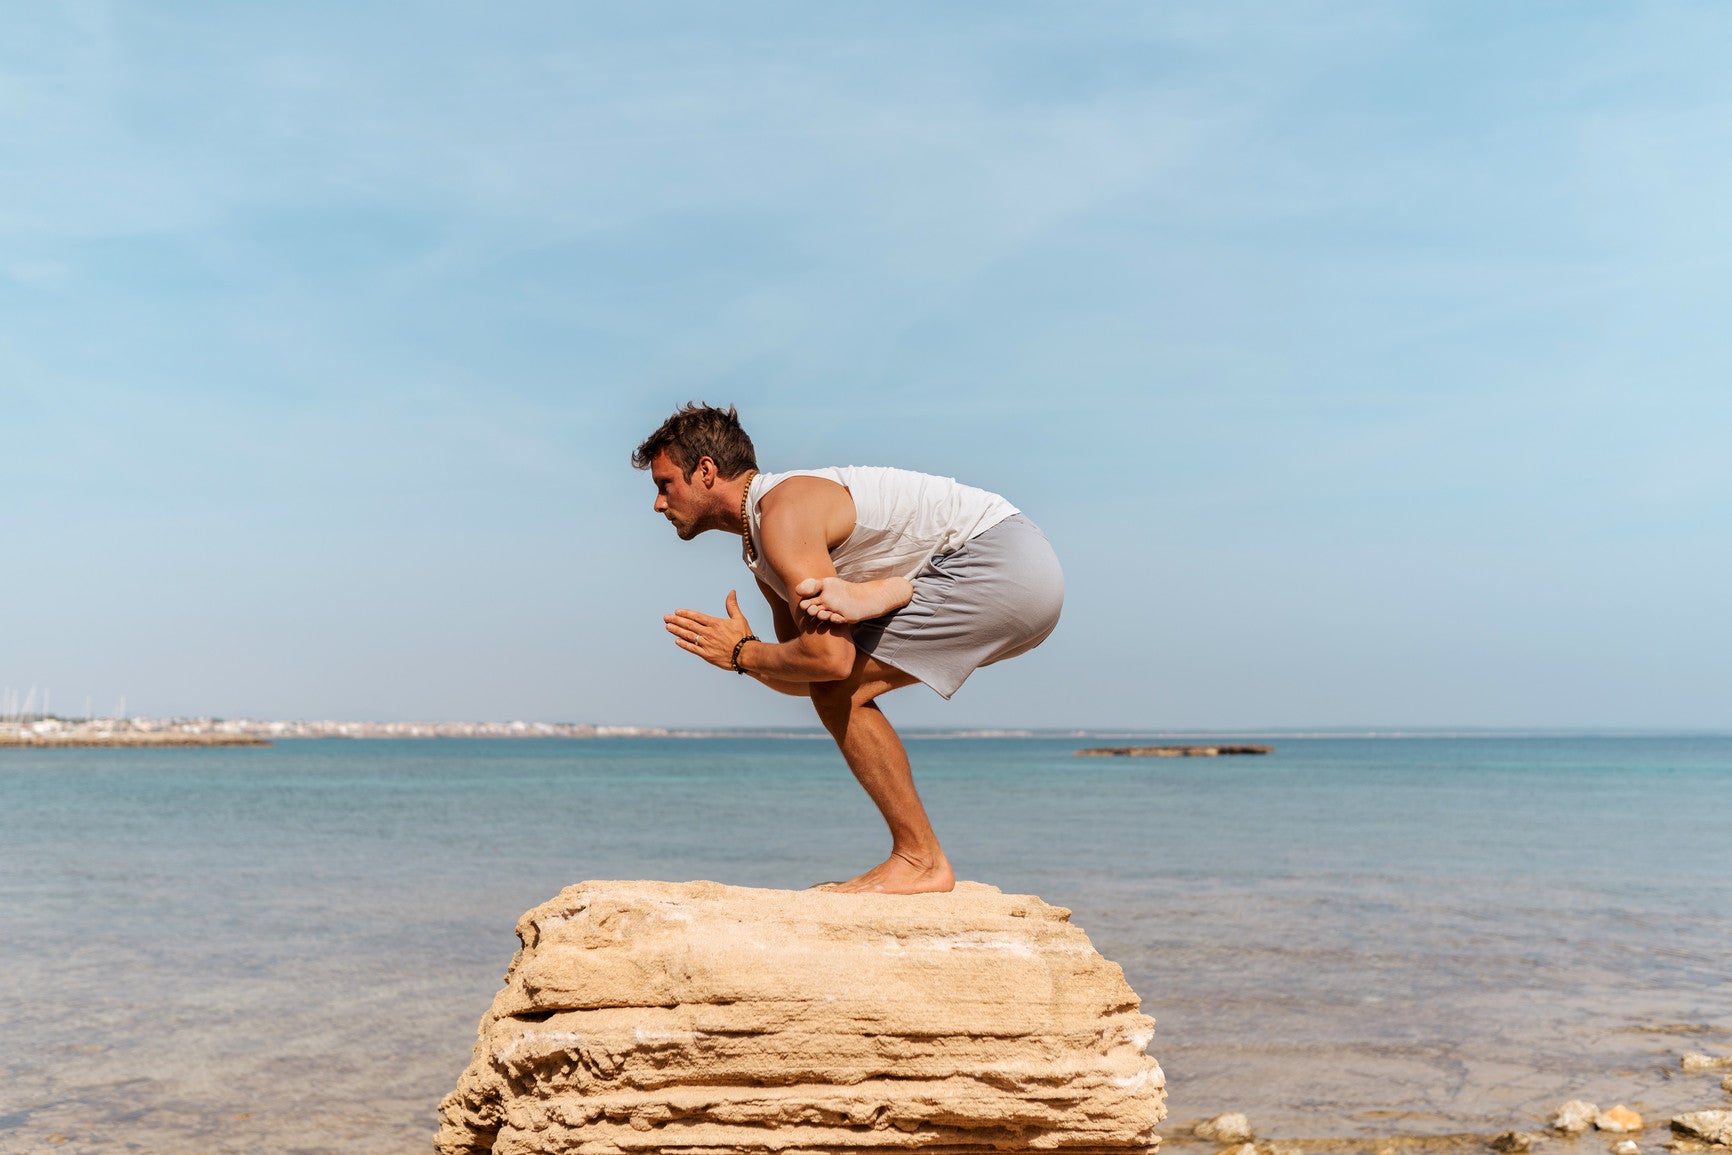 Man practicing a one leg balance pose as part of his yoga workout outdoors.